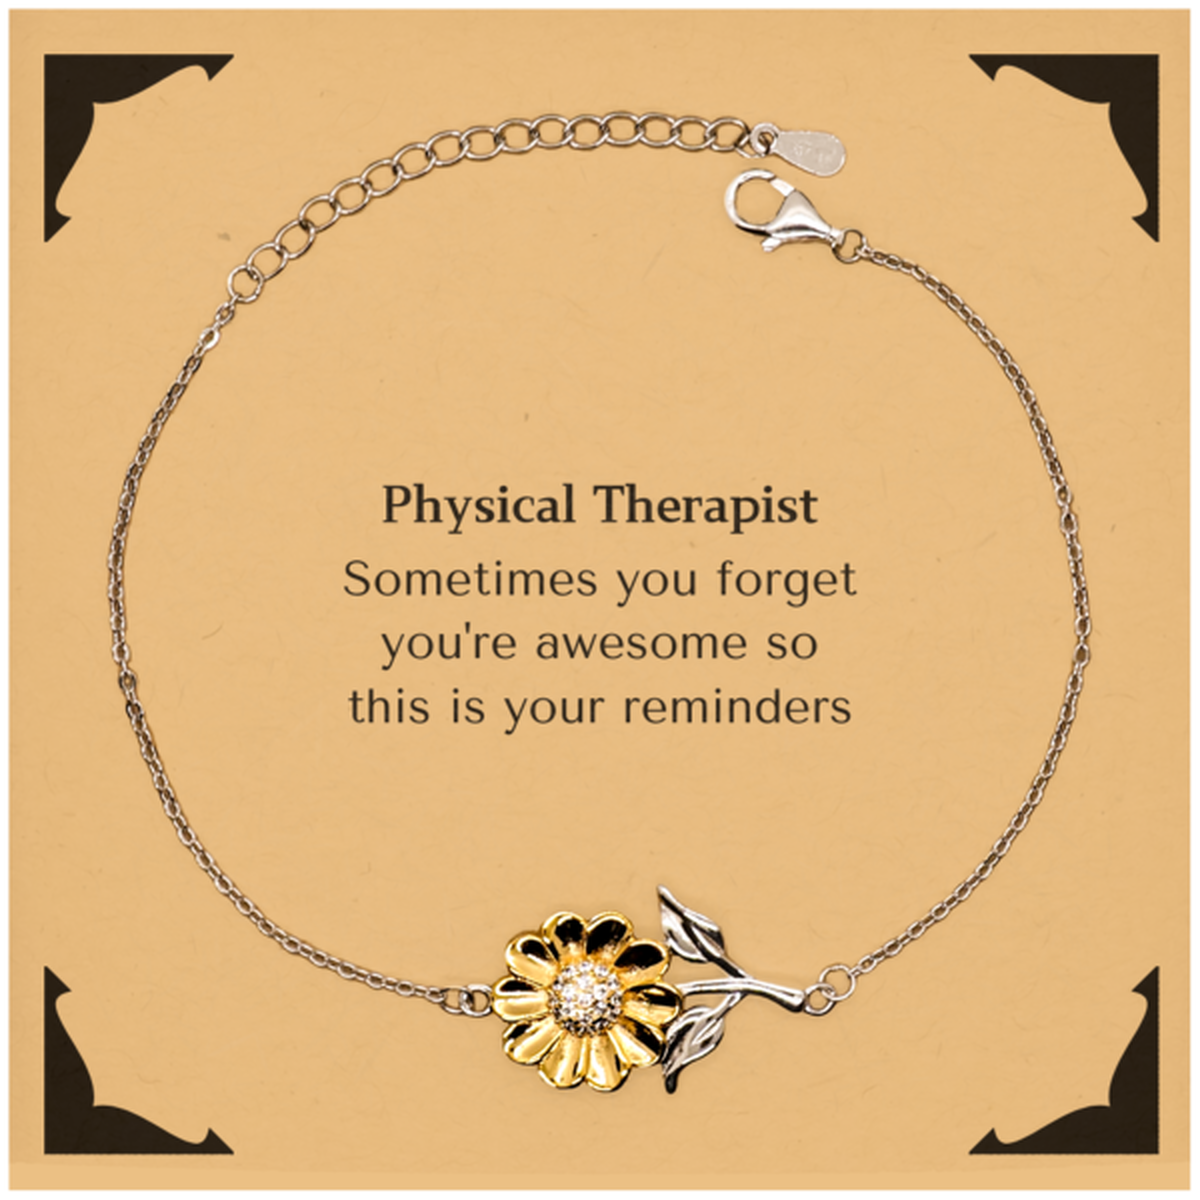 Sentimental Physical Therapist Sunflower Bracelet, Physical Therapist Sometimes you forget you're awesome so this is your reminders, Graduation Christmas Birthday Gifts for Physical Therapist, Men, Women, Coworkers